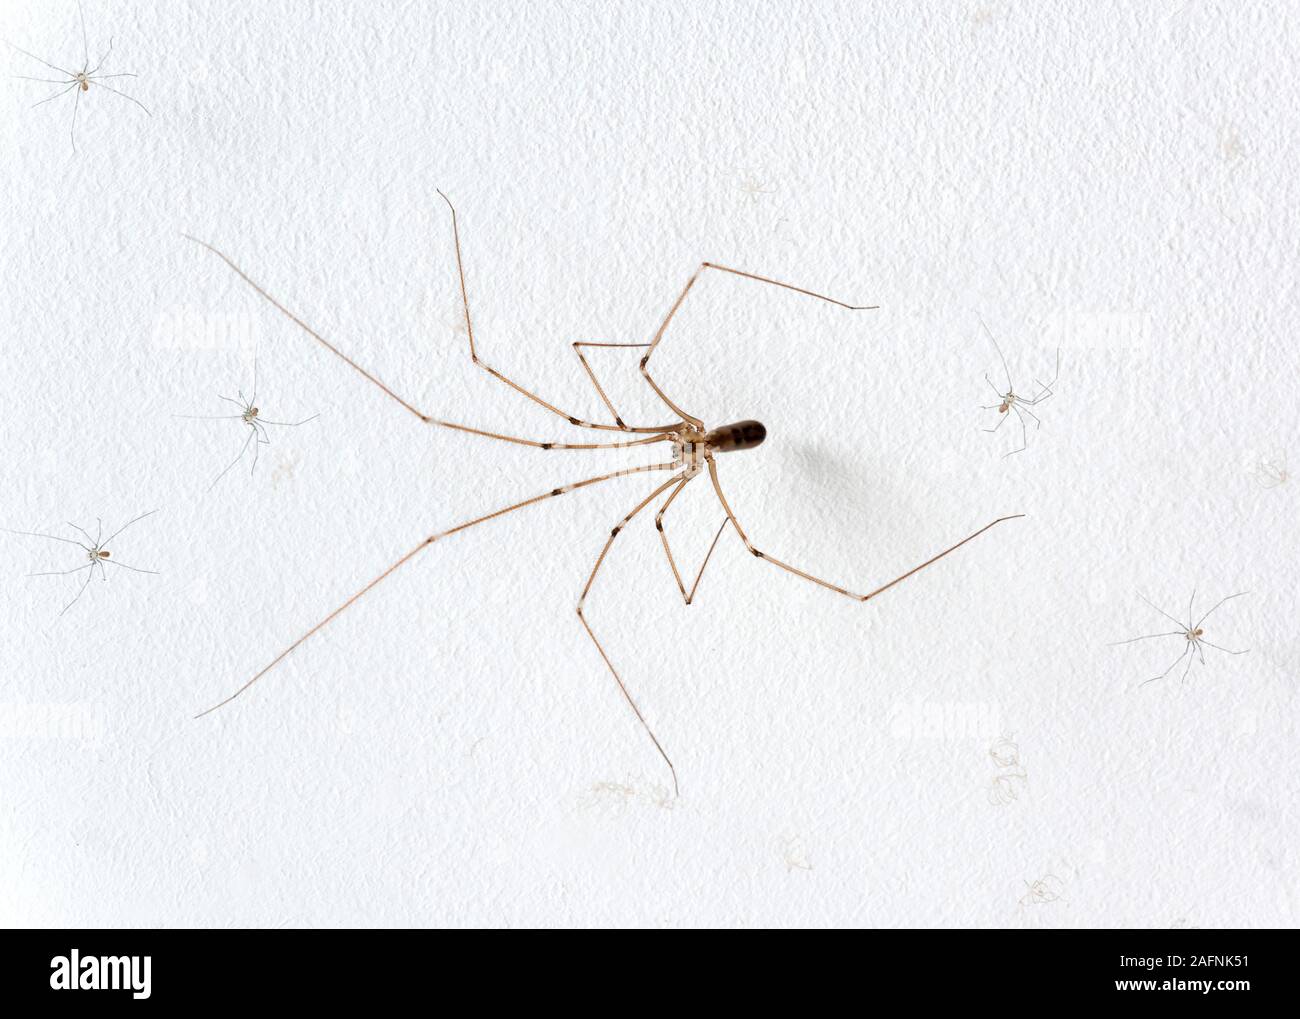 Pholcus phalangioides / daddy long-gambe spider Foto Stock